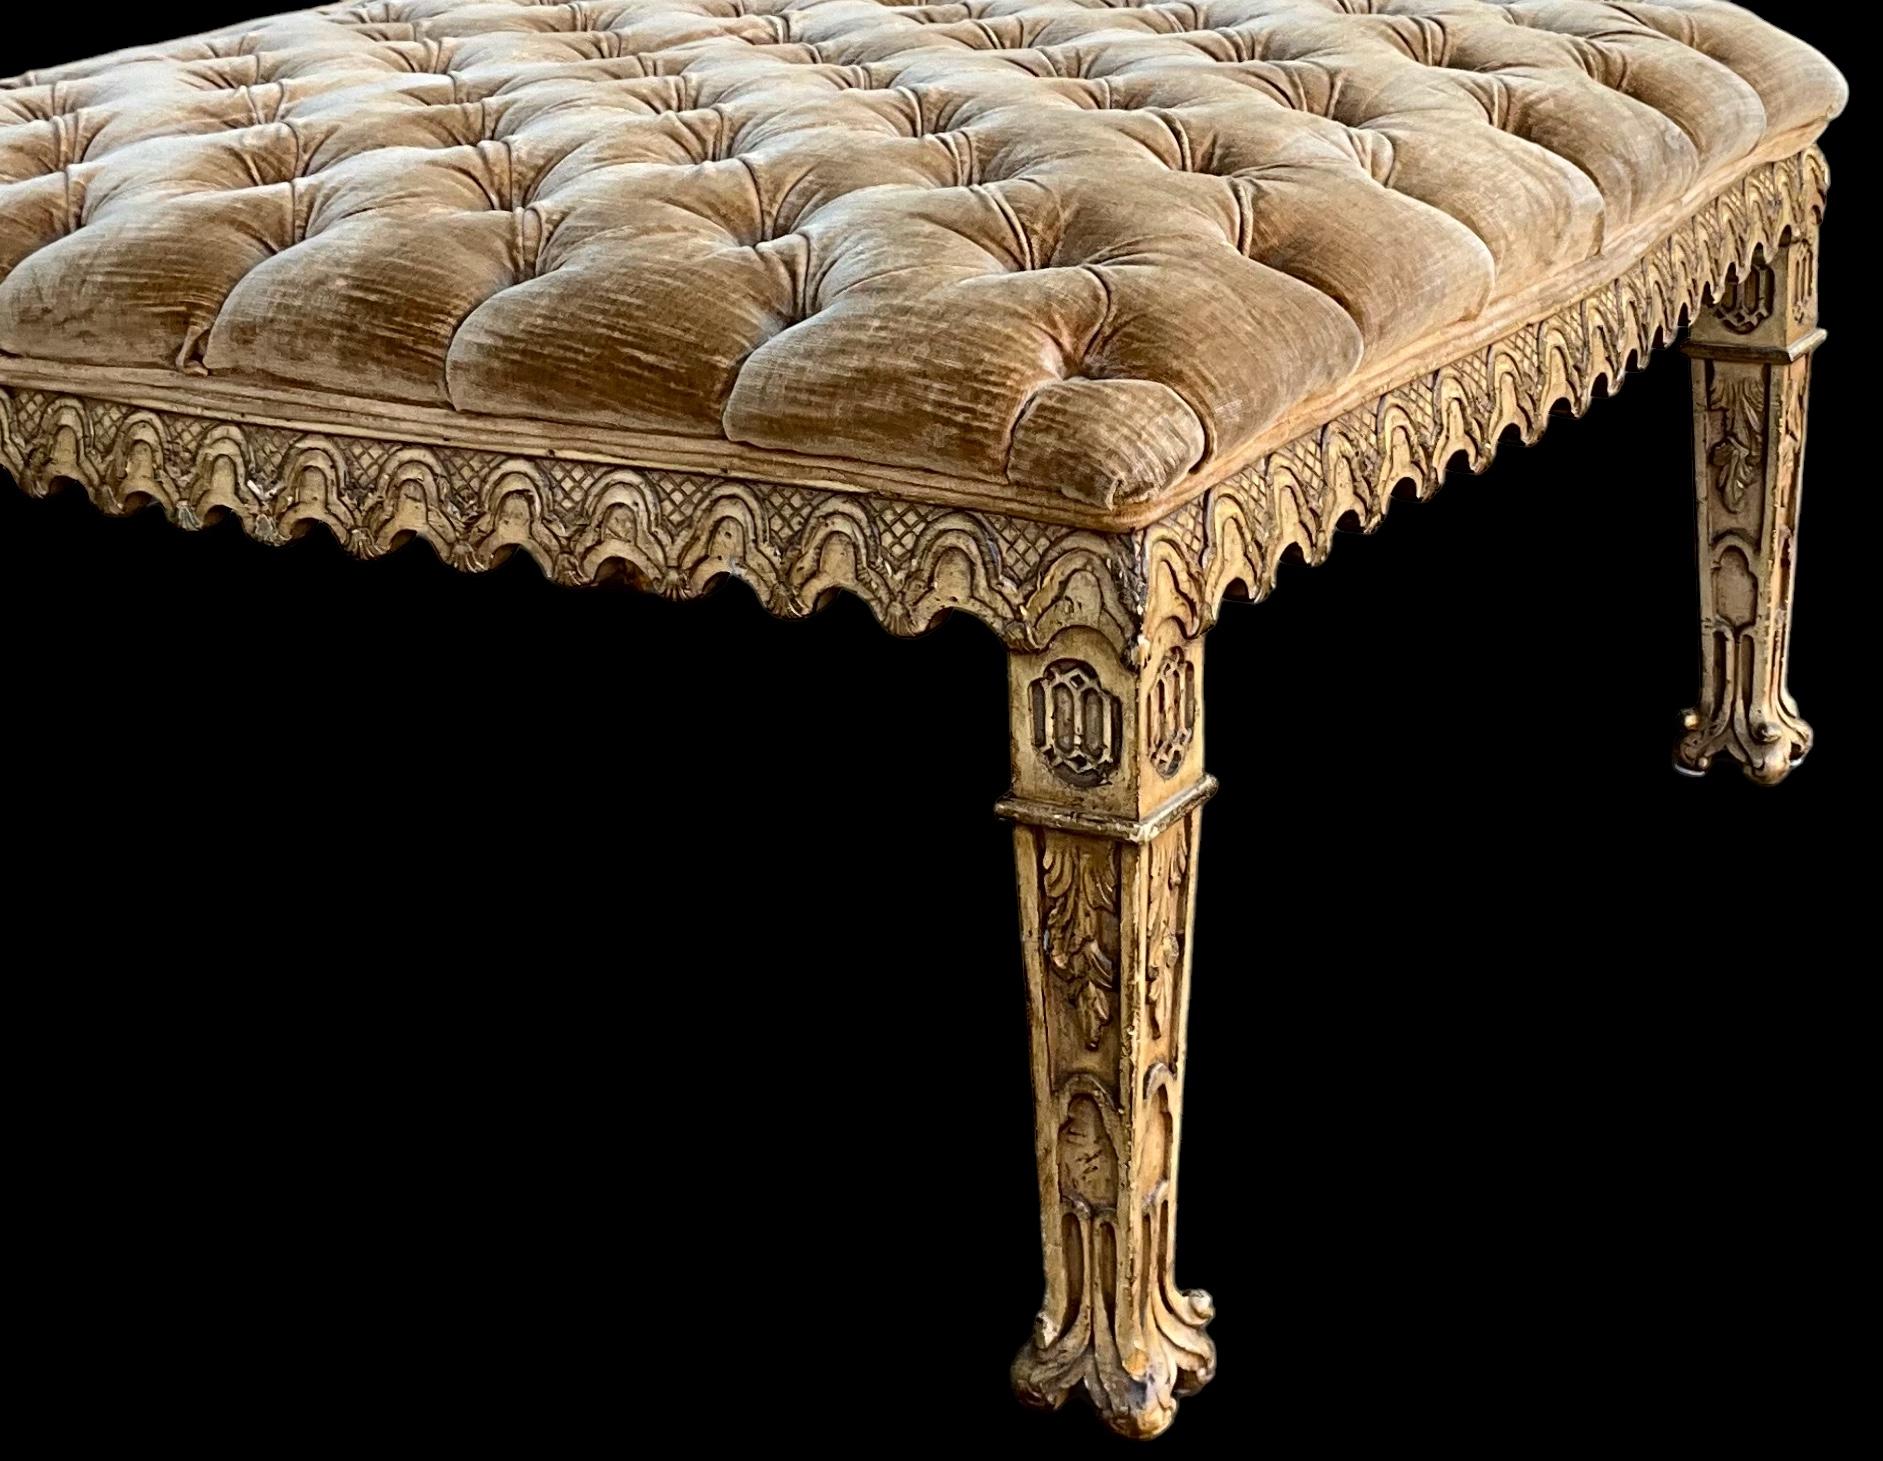 This is a Venetian style heavily carved ottoman. The tufted velvet upholstery is original and shows light wear but is free from tears or stains. The piece is unmarked.